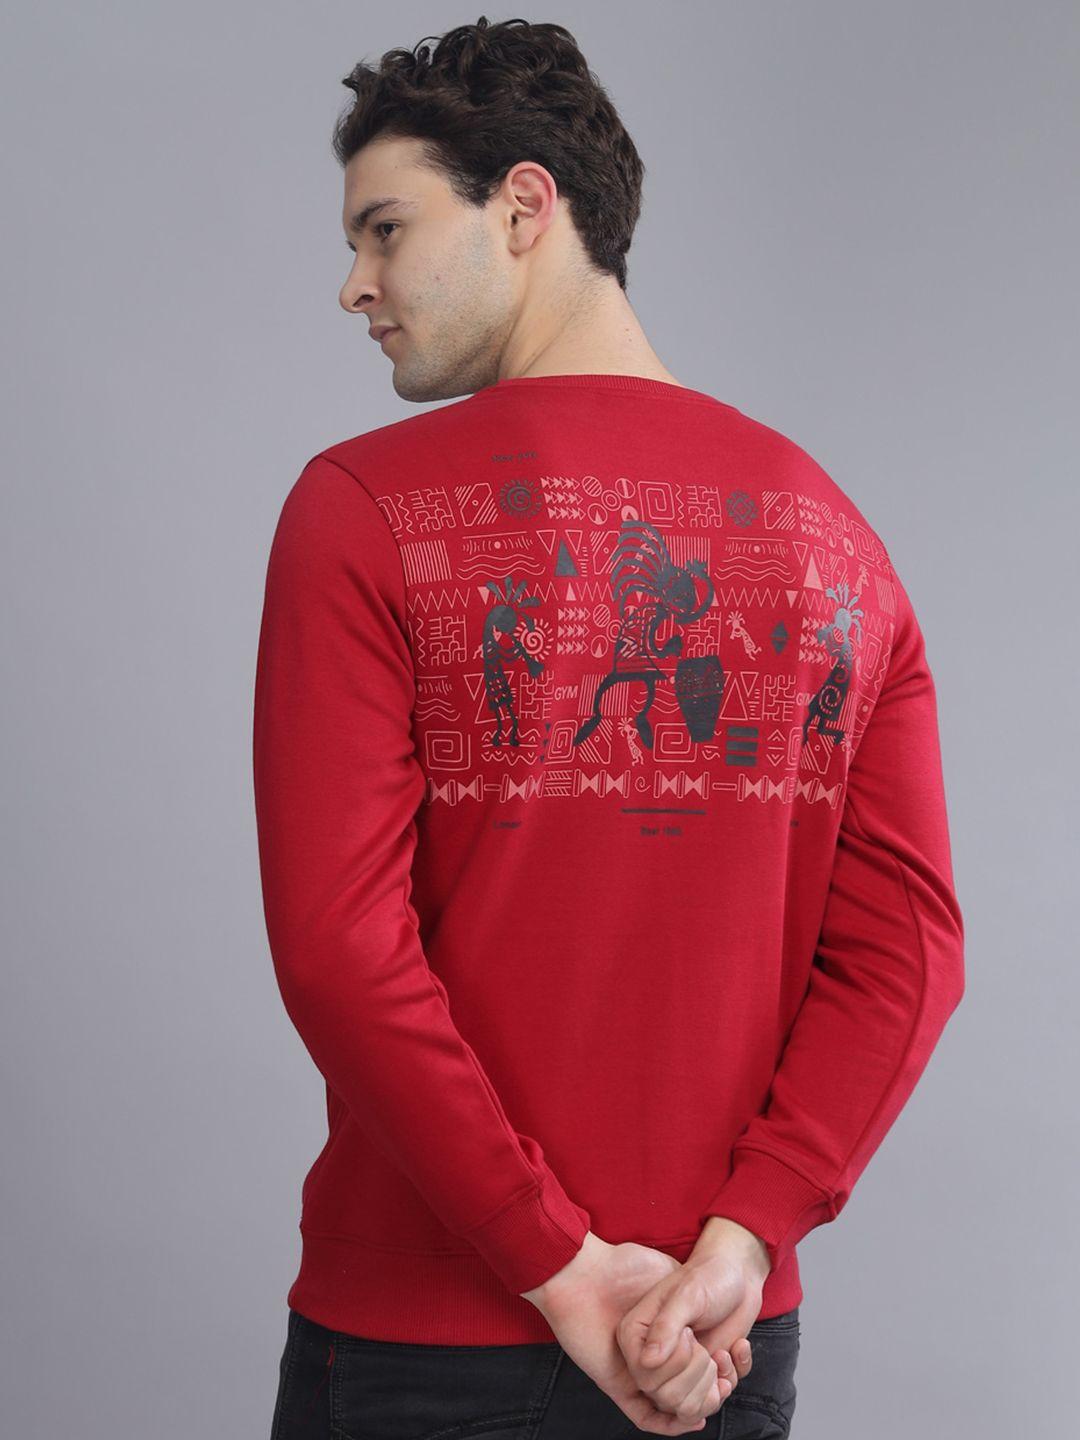 parcel yard graphic printed long sleeves anti odour cotton pullover